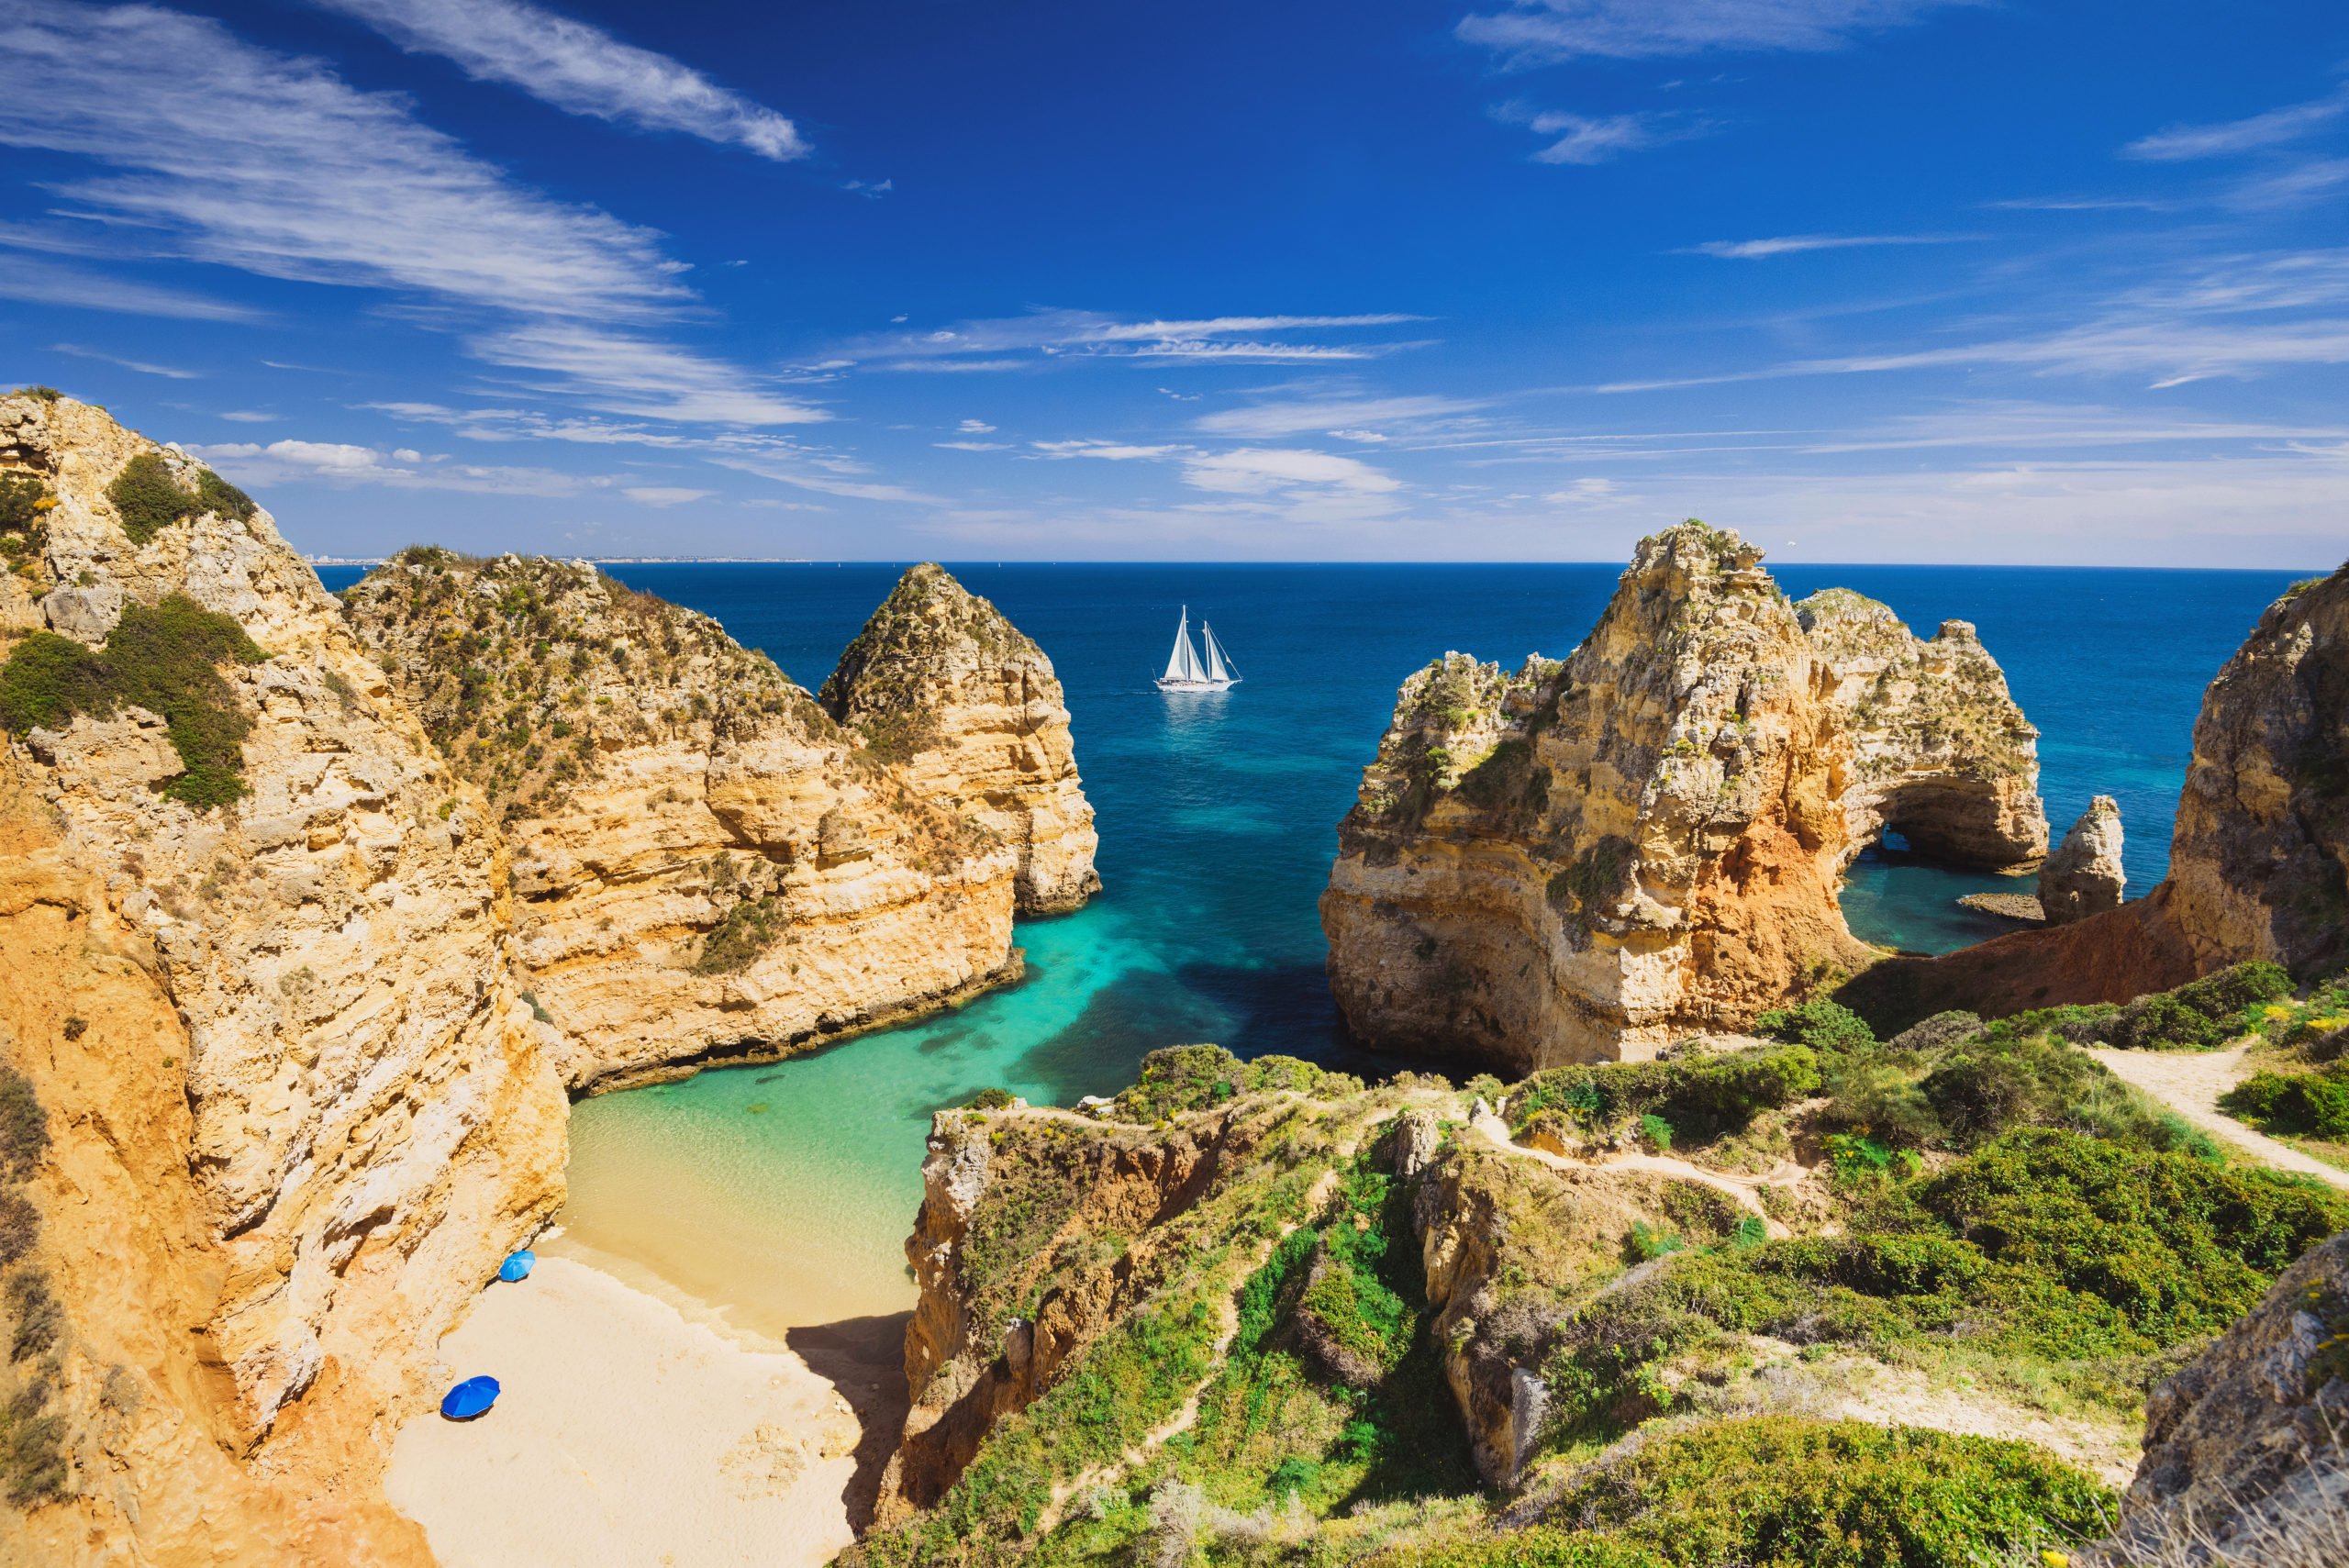 Take A Swim At The Beautiful Algarve Beaches On The Highlights Of Portugal 11 Day Package Tour